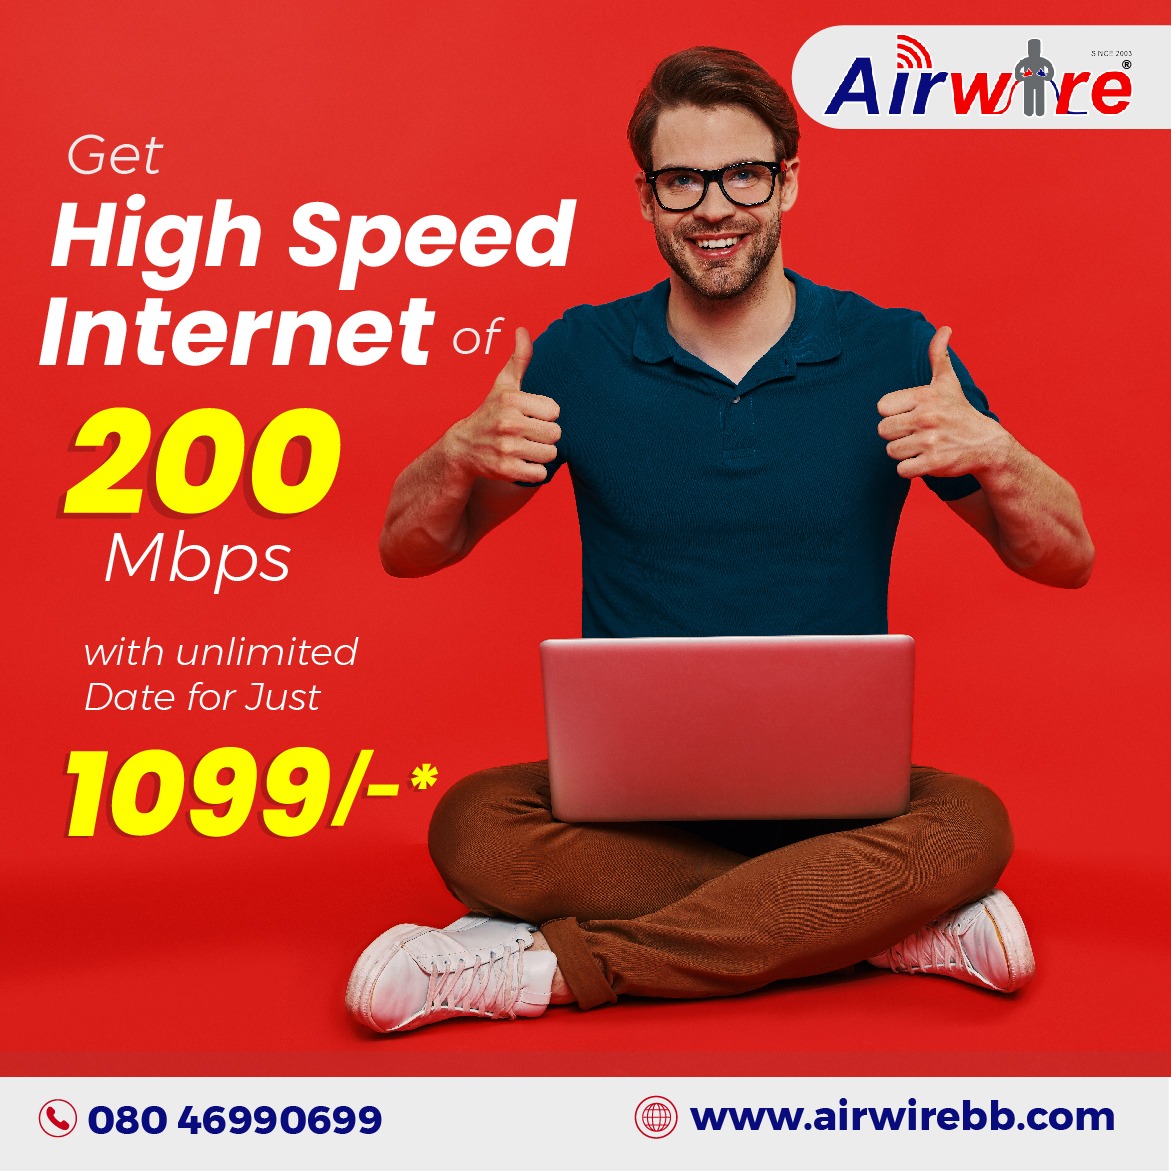 Get  High Speed Internet of 200Mbps with  unlimited Data For Just  1099/-*......
#broadband #WIFI #internetserviceprovider #HighSpeedInternet  #homewifi #fastinternet  #InternetConnection  #serviceprovider #BroadbandForAll #bangaloreinternet #HighSpeedInternet #internetandservice